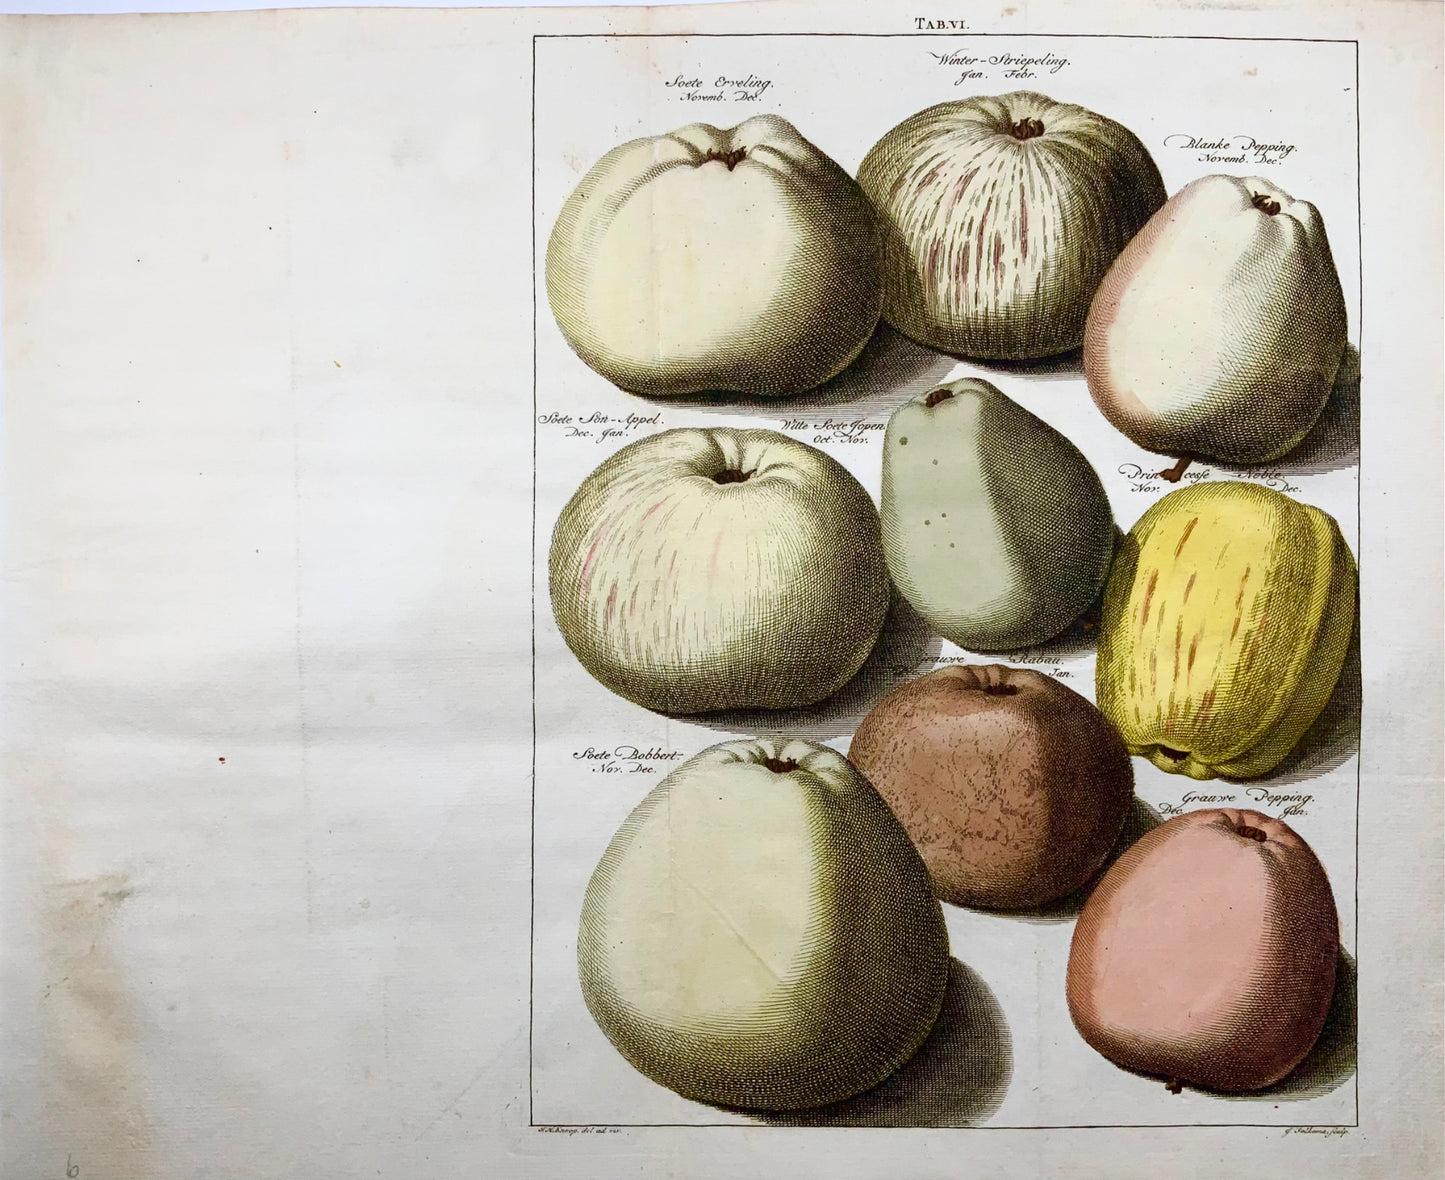 1758 Apples, fruit, folio copper engraving after Knoop by Folkema, botany